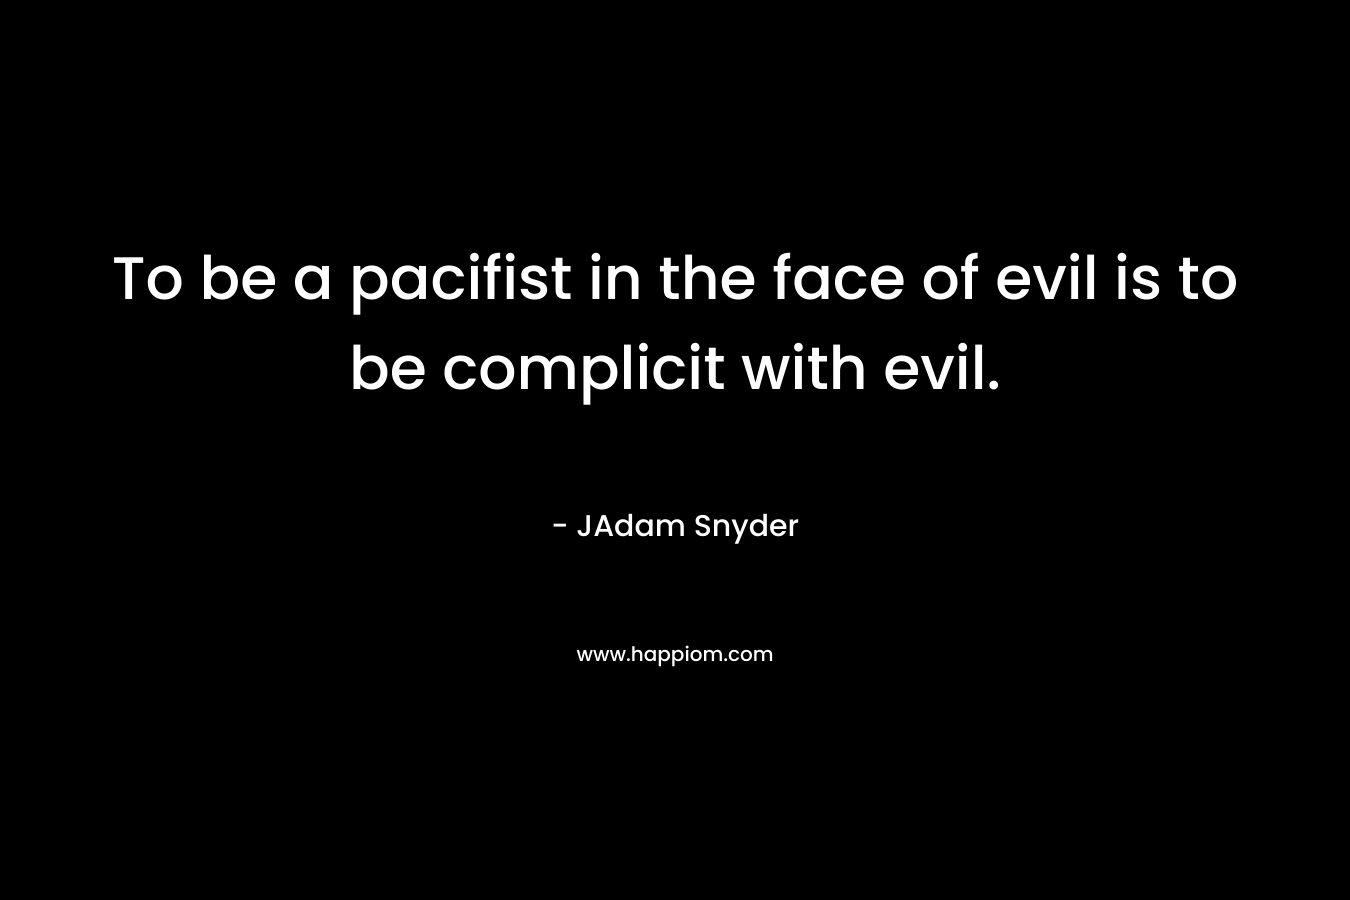 To be a pacifist in the face of evil is to be complicit with evil.